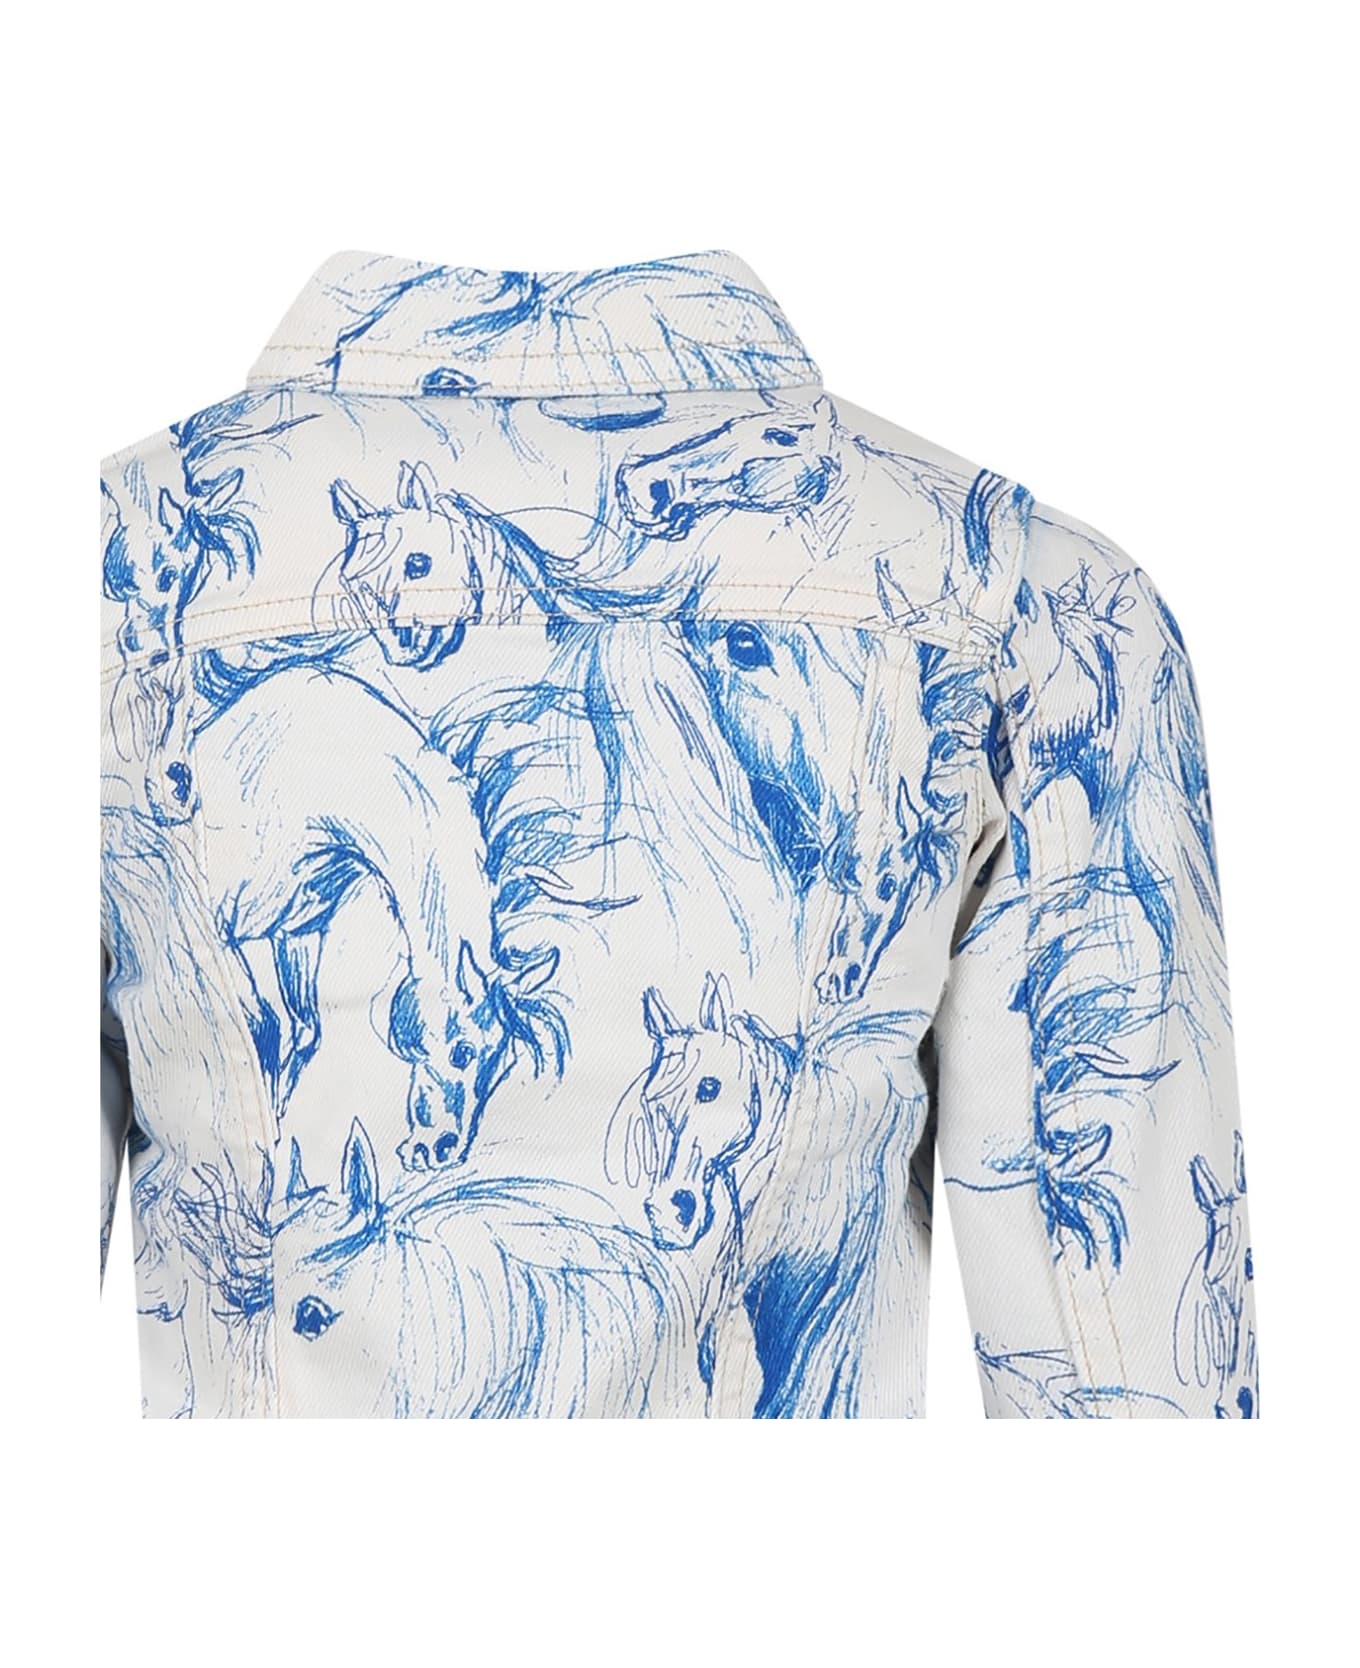 Molo Ivory Jacket For Girl With Horse Print - Multicolor